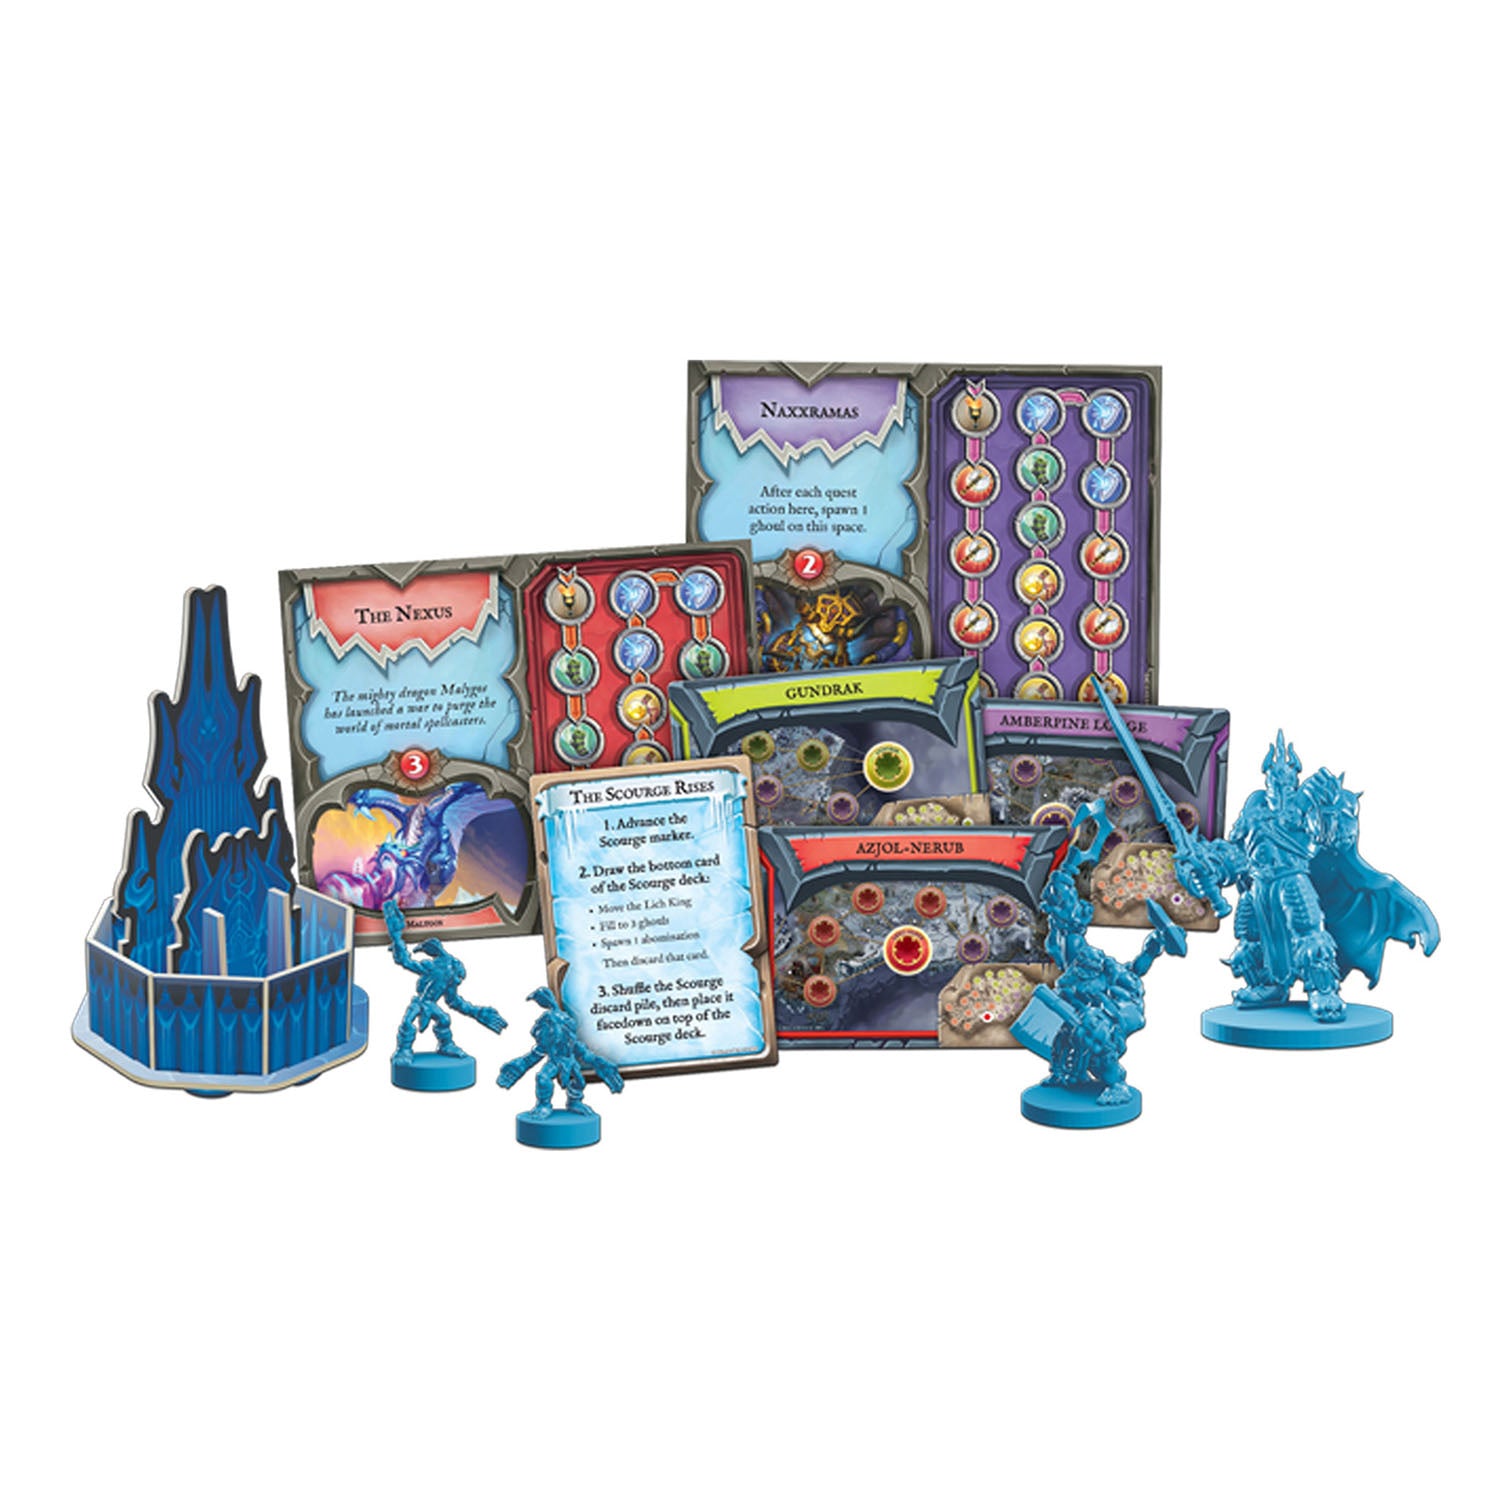 World of Warcraft: Wrath of the Lich King-A Pandemic System Board Game in Blue - Front Card View